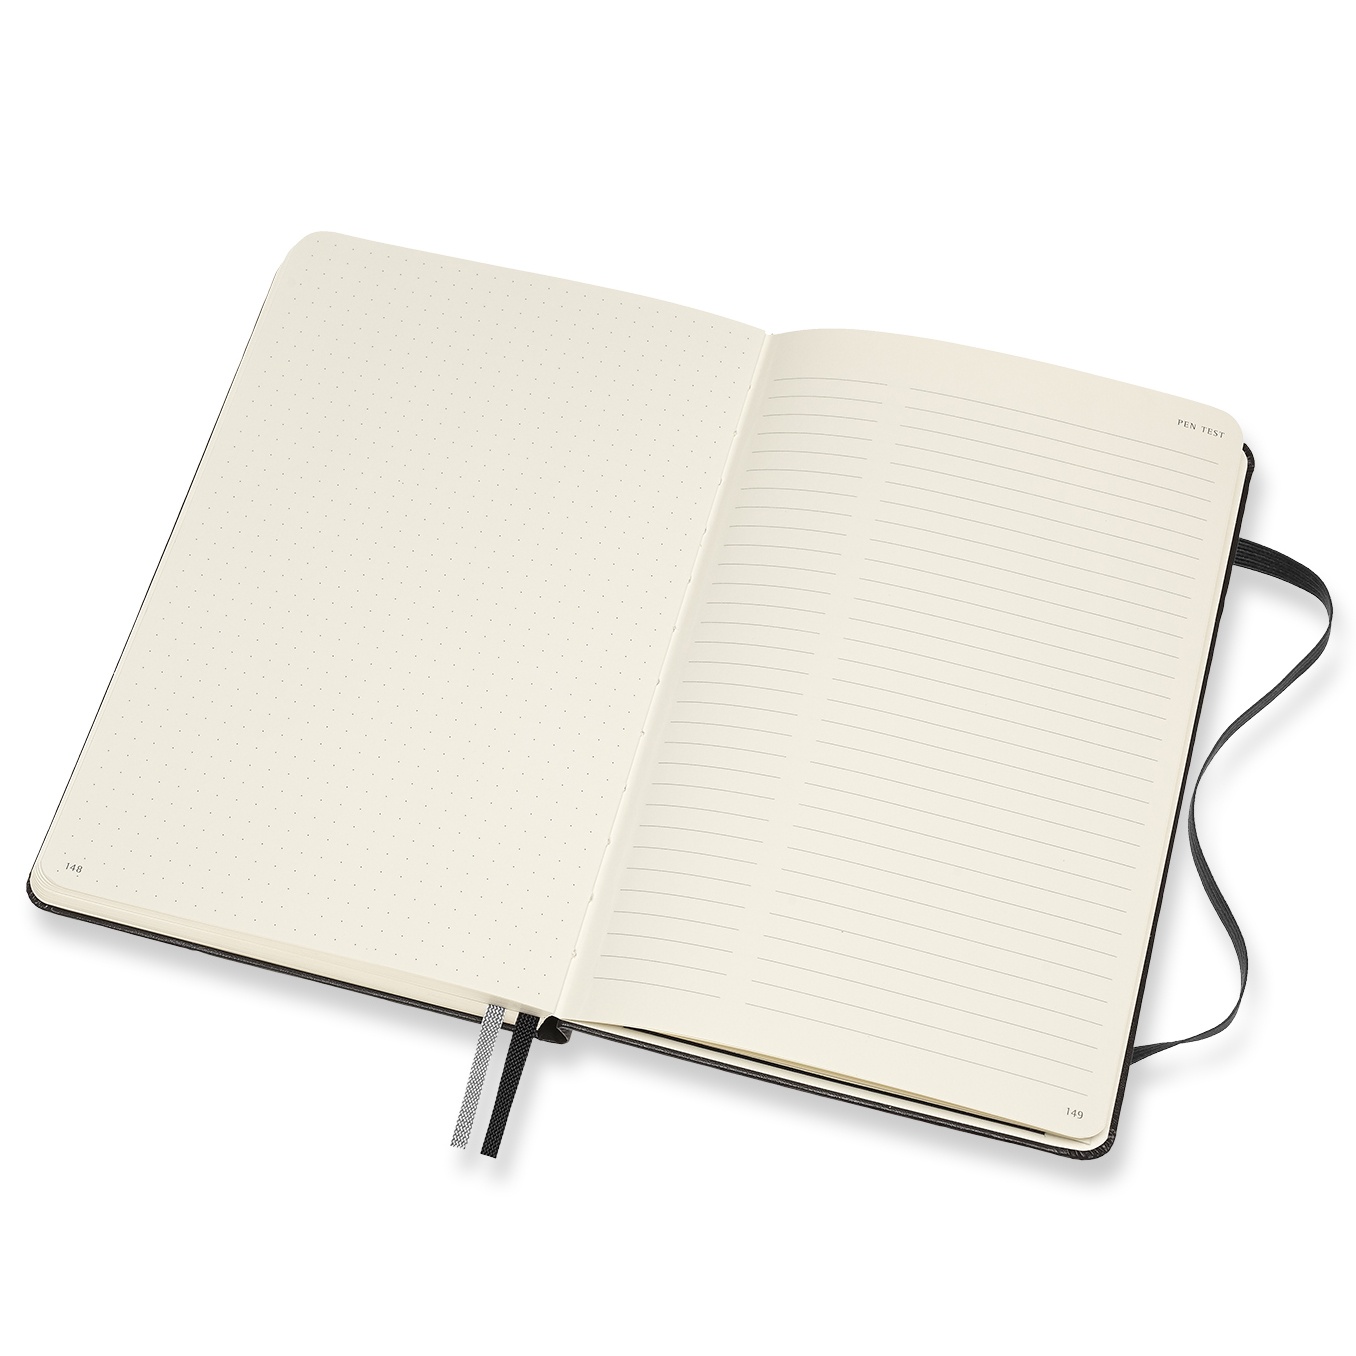 Art Bullet Notebook Large Black in the group Paper & Pads / Note & Memo / Notebooks & Journals at Voorcrea (100375)